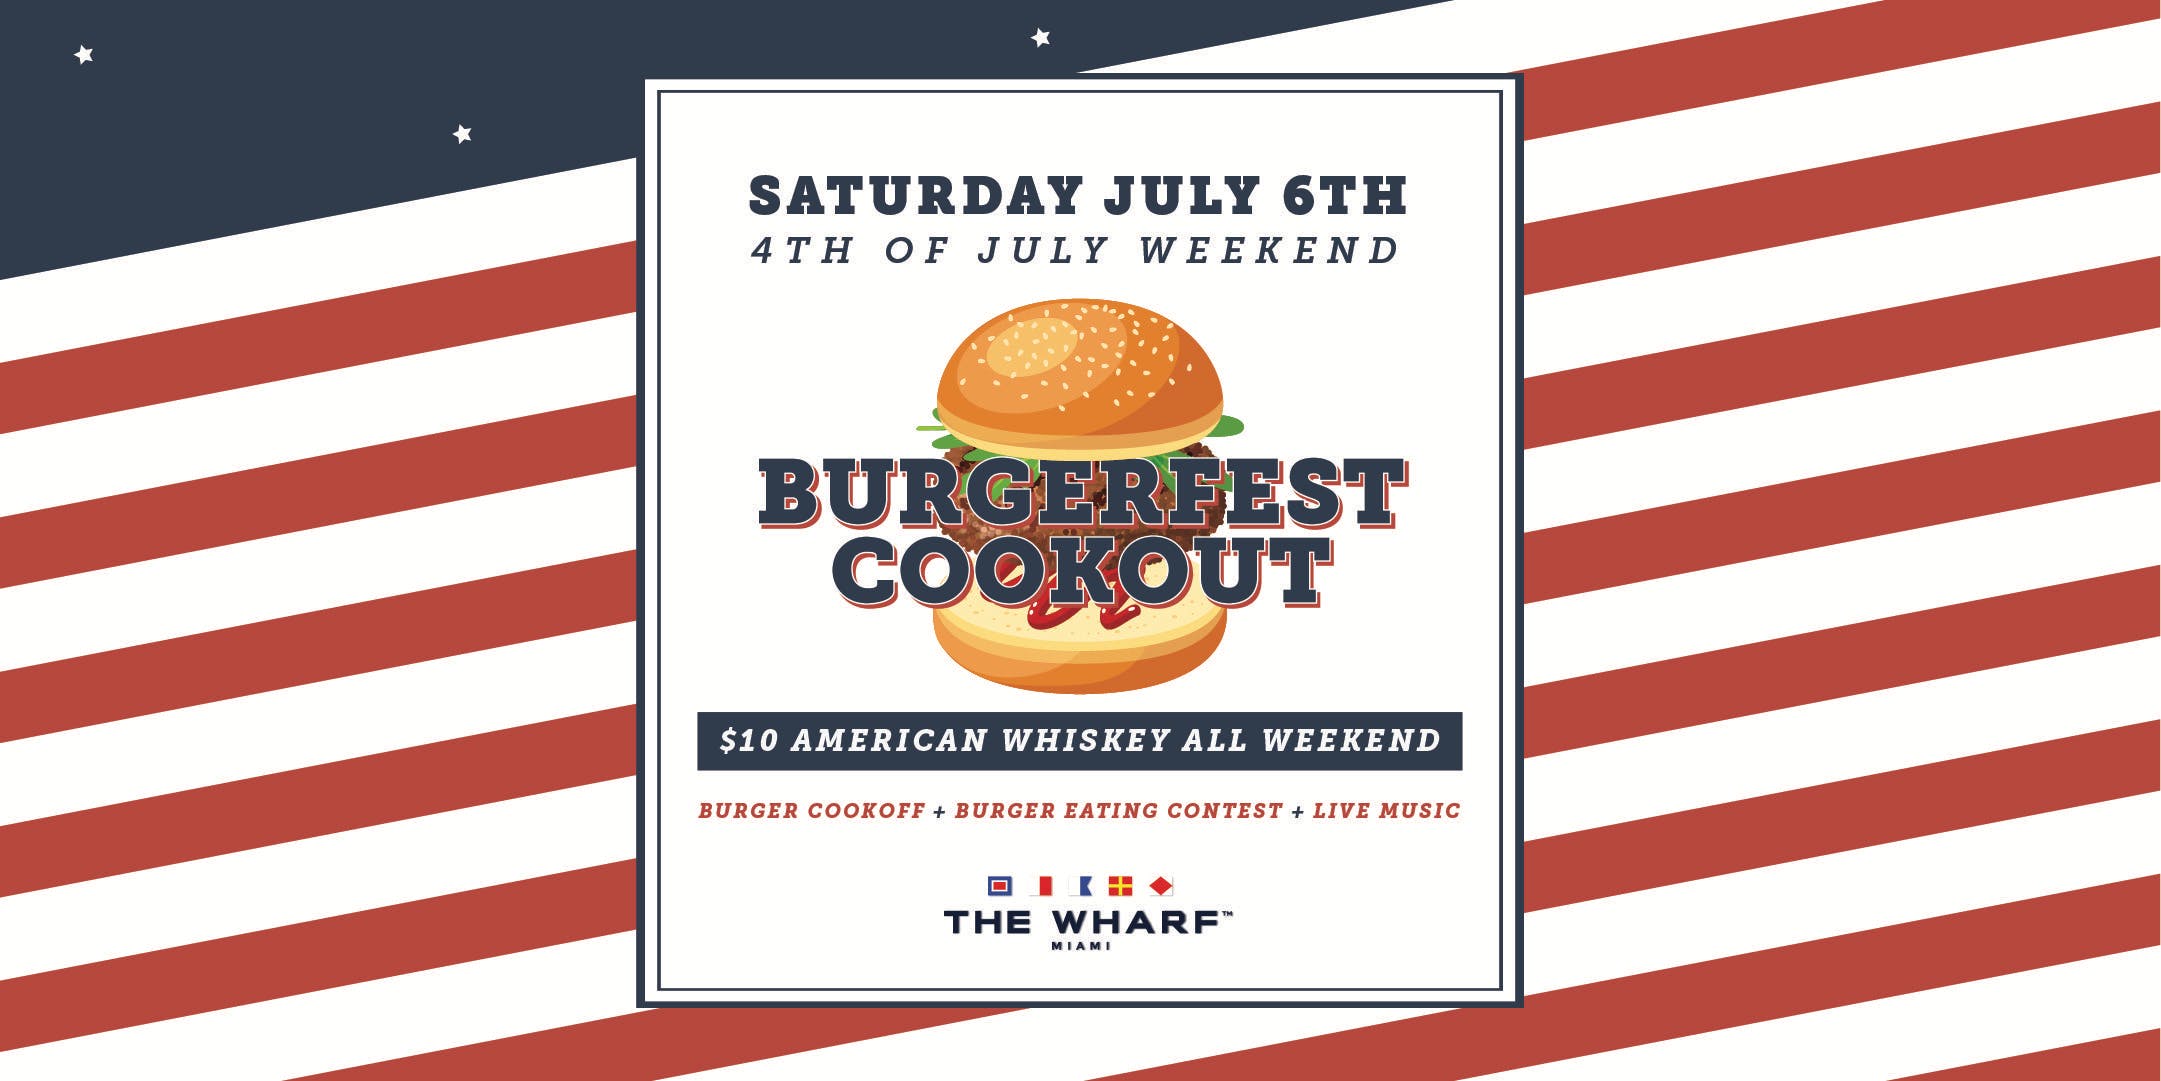 Cookout Logo - Burgerfest Cookout! - '4th of July Weekend' - Wharf Miami